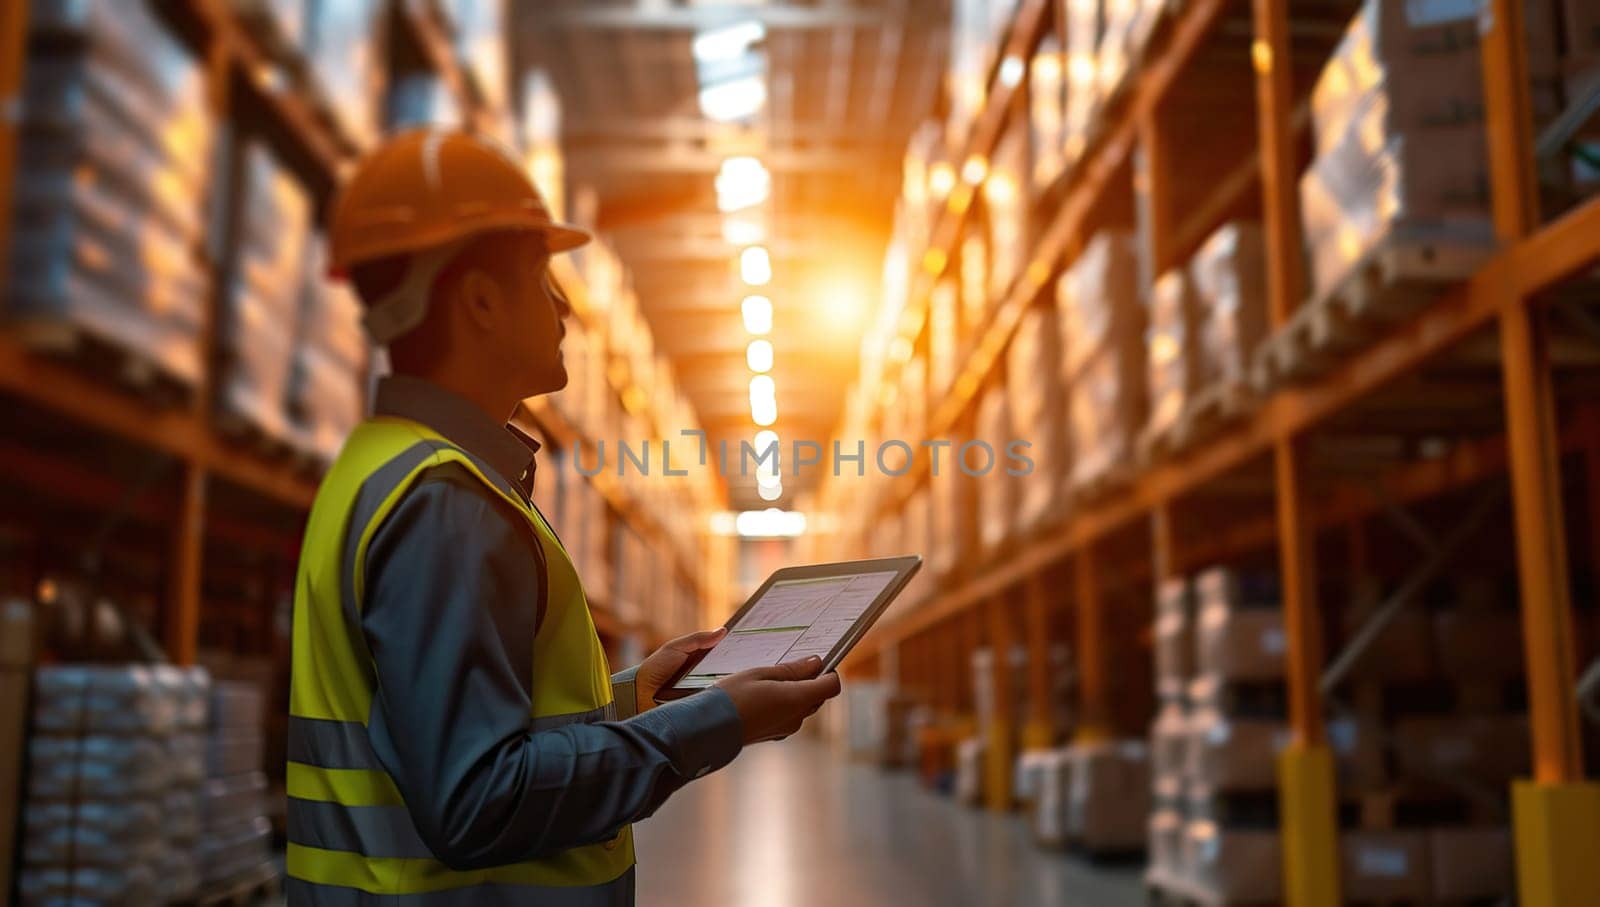 Warehouse Worker Reviews Inventory with Tablet